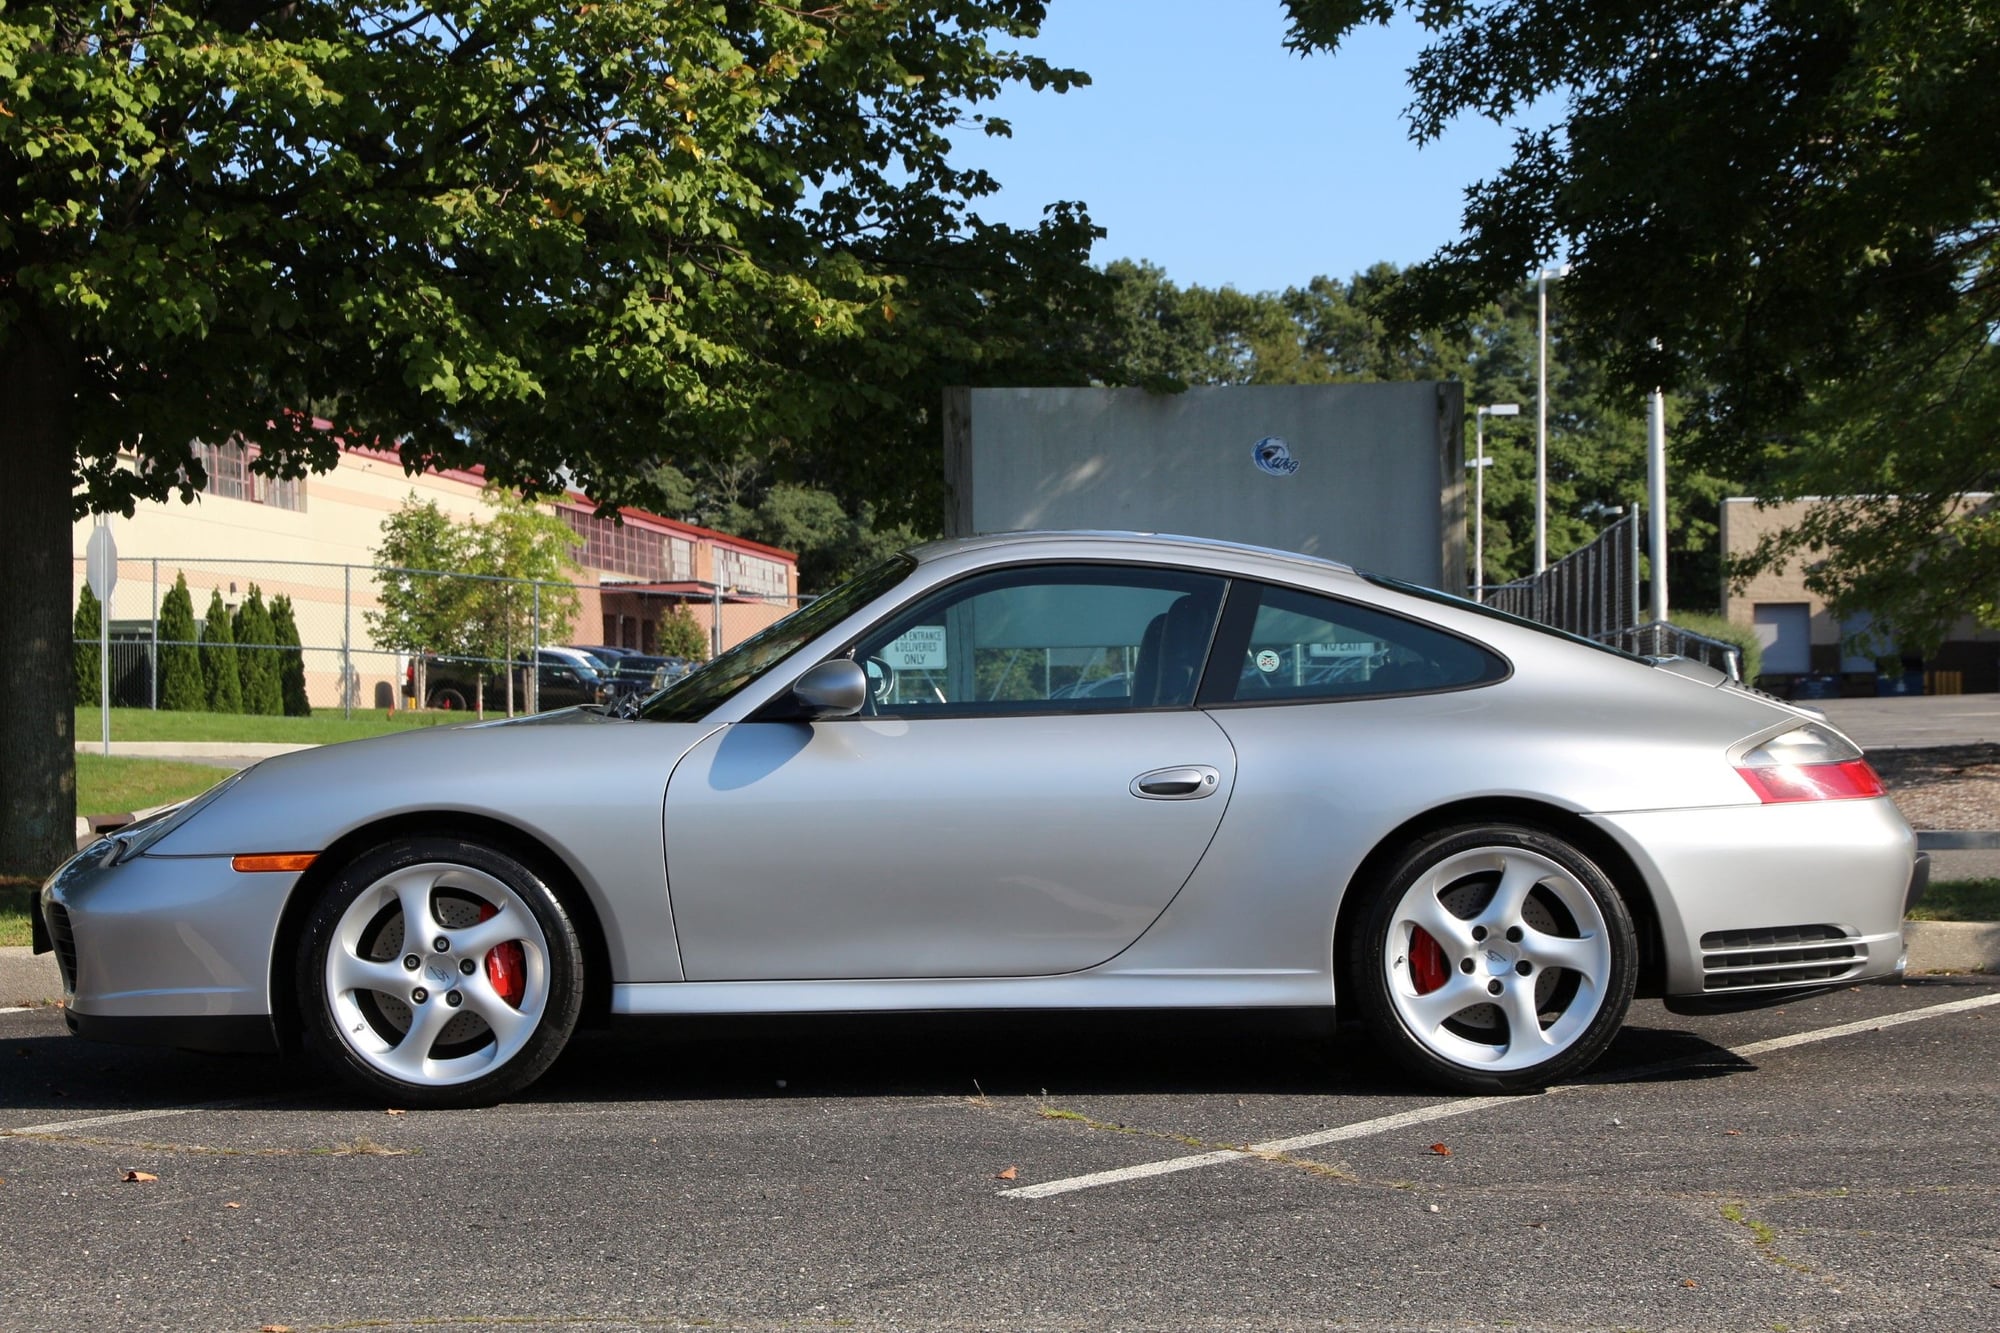 2003 Porsche 911 - FS: 2003 Porsche 911 Carrera 4S 996 6-Speed Manual Silver/Black - Used - VIN WP0AA29903S620595 - 61,030 Miles - 6 cyl - AWD - Manual - Coupe - Silver - Brooklyn, NY 11229, United States